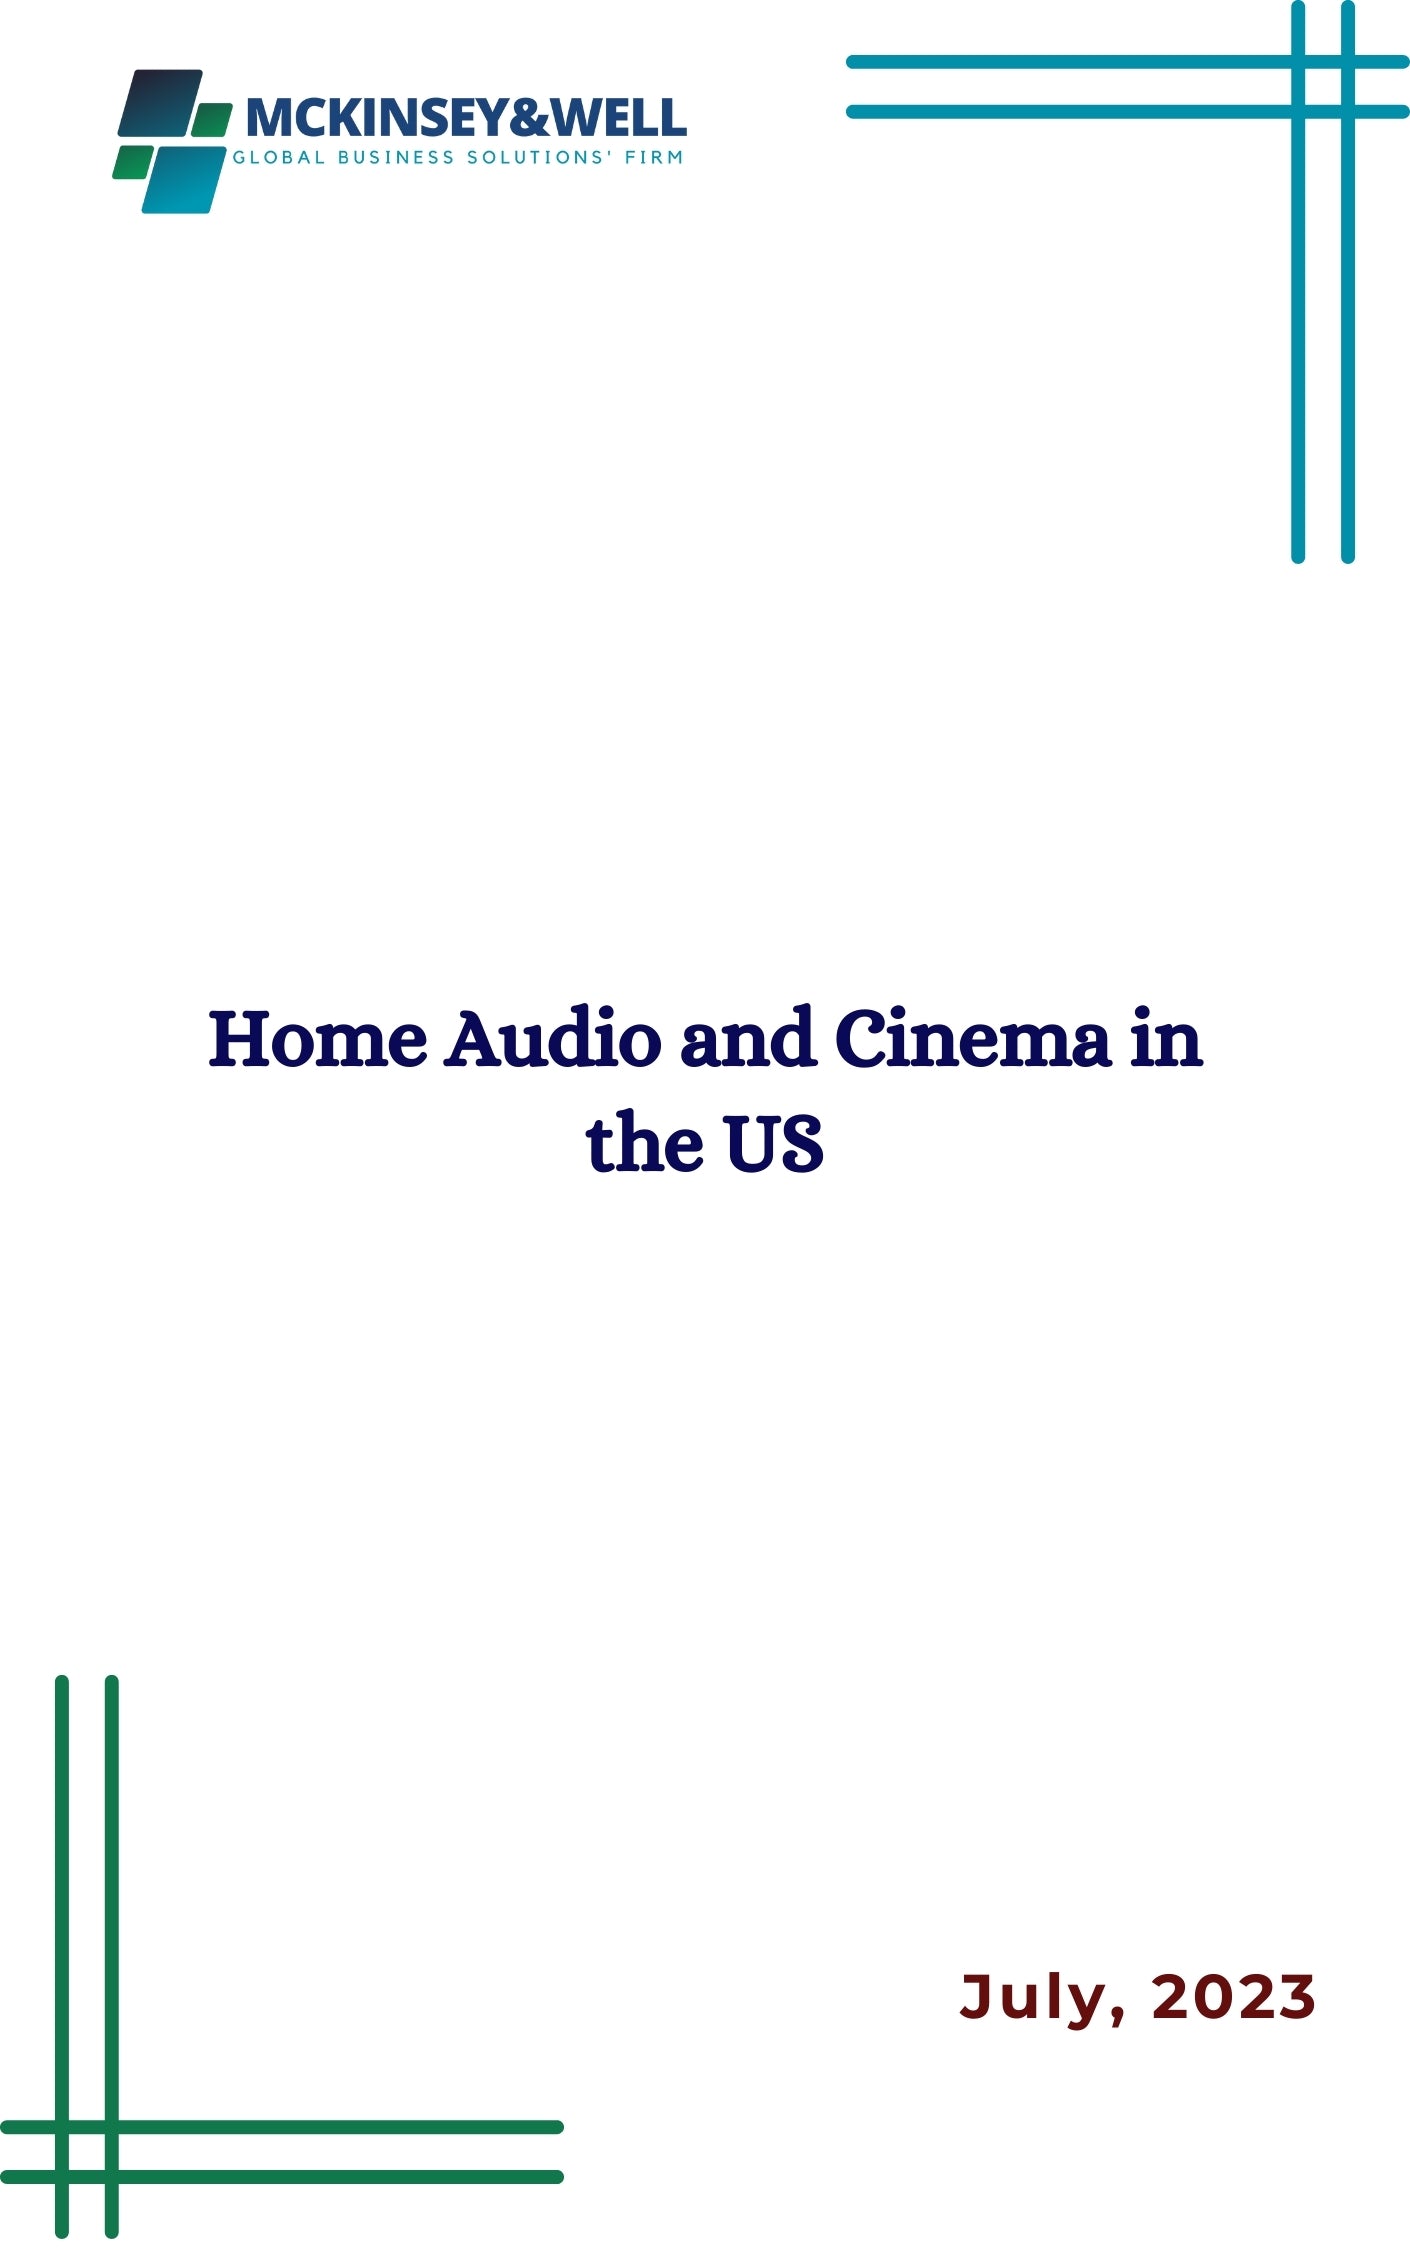 Home Audio and Cinema in the US